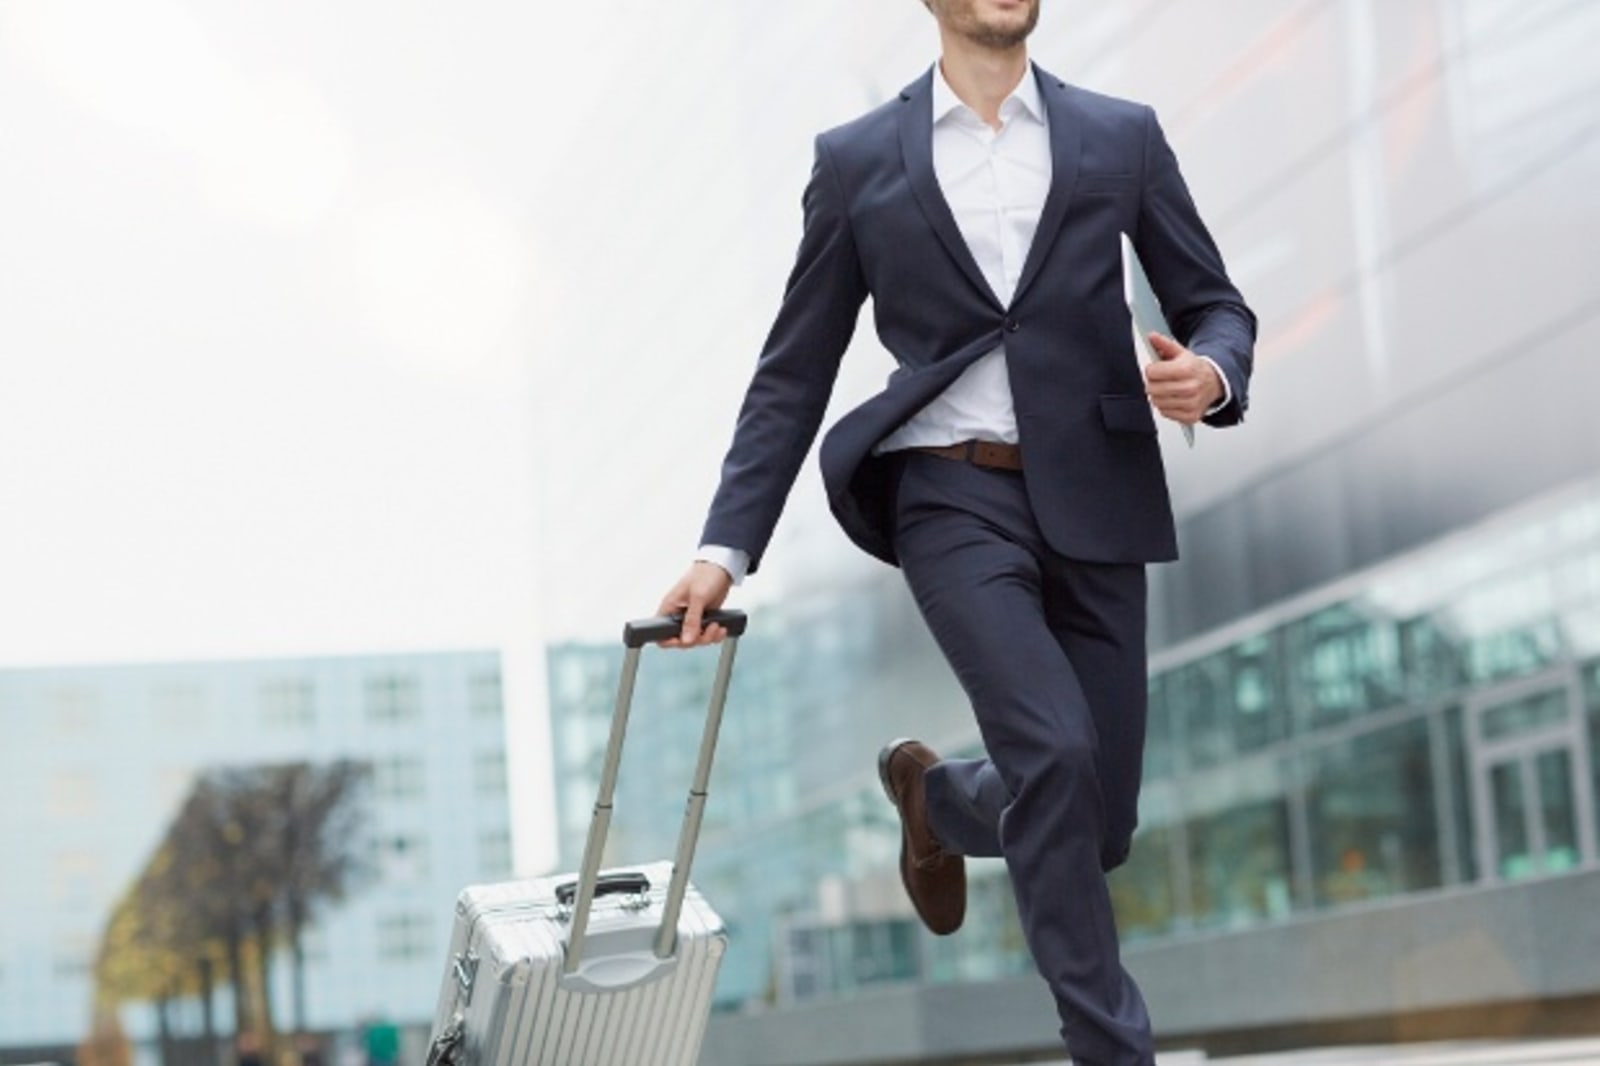 Man running in airport holding luggage